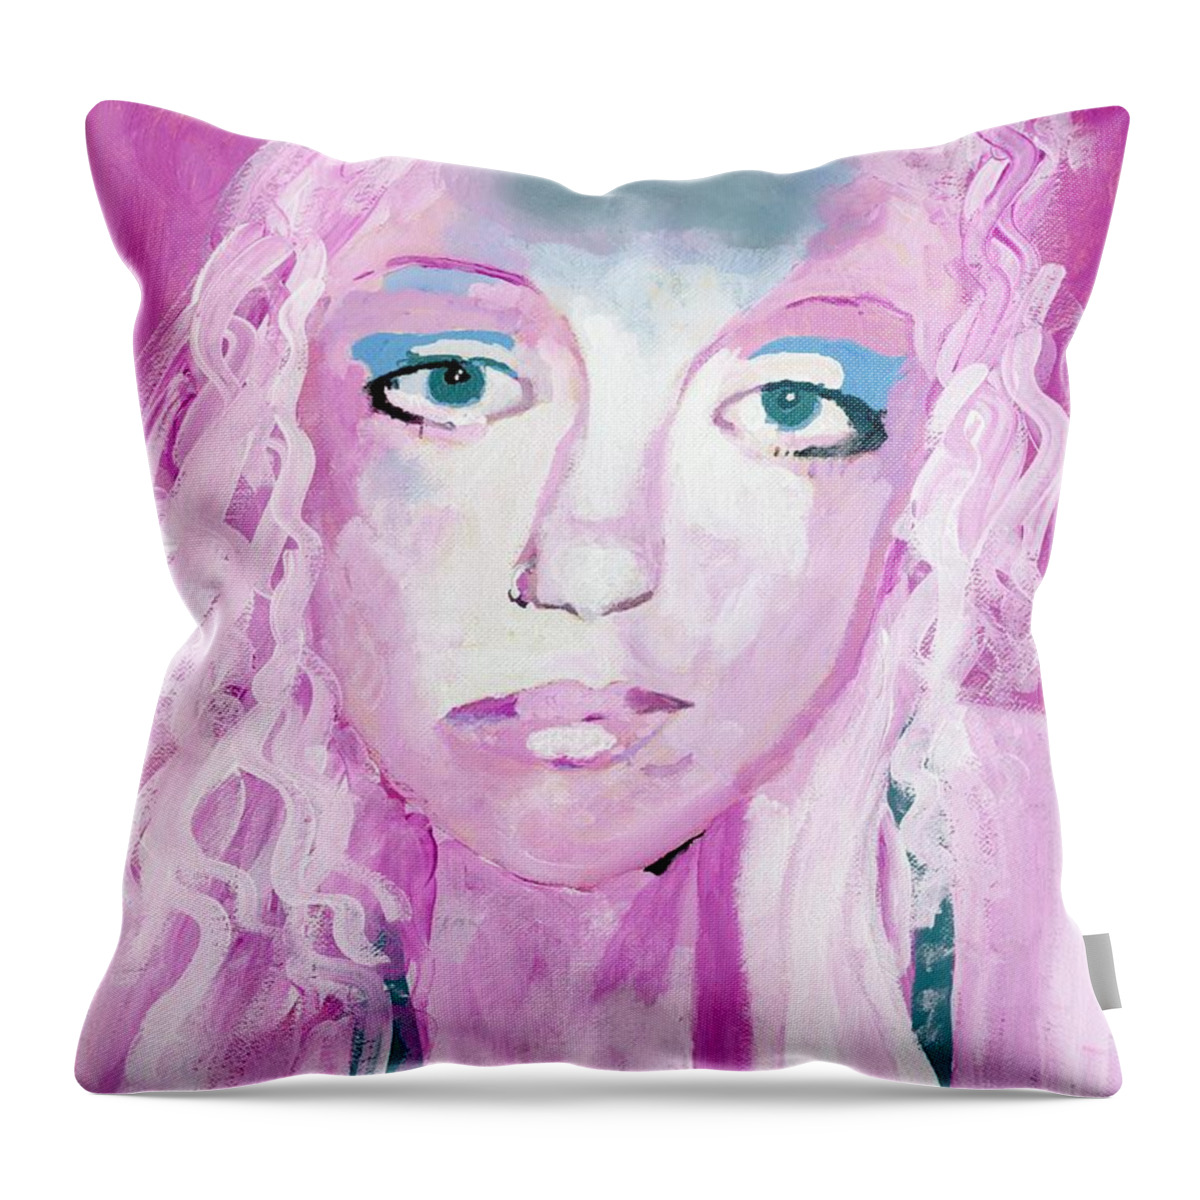 Empath Throw Pillow featuring the painting The Empath by Vennie Kocsis